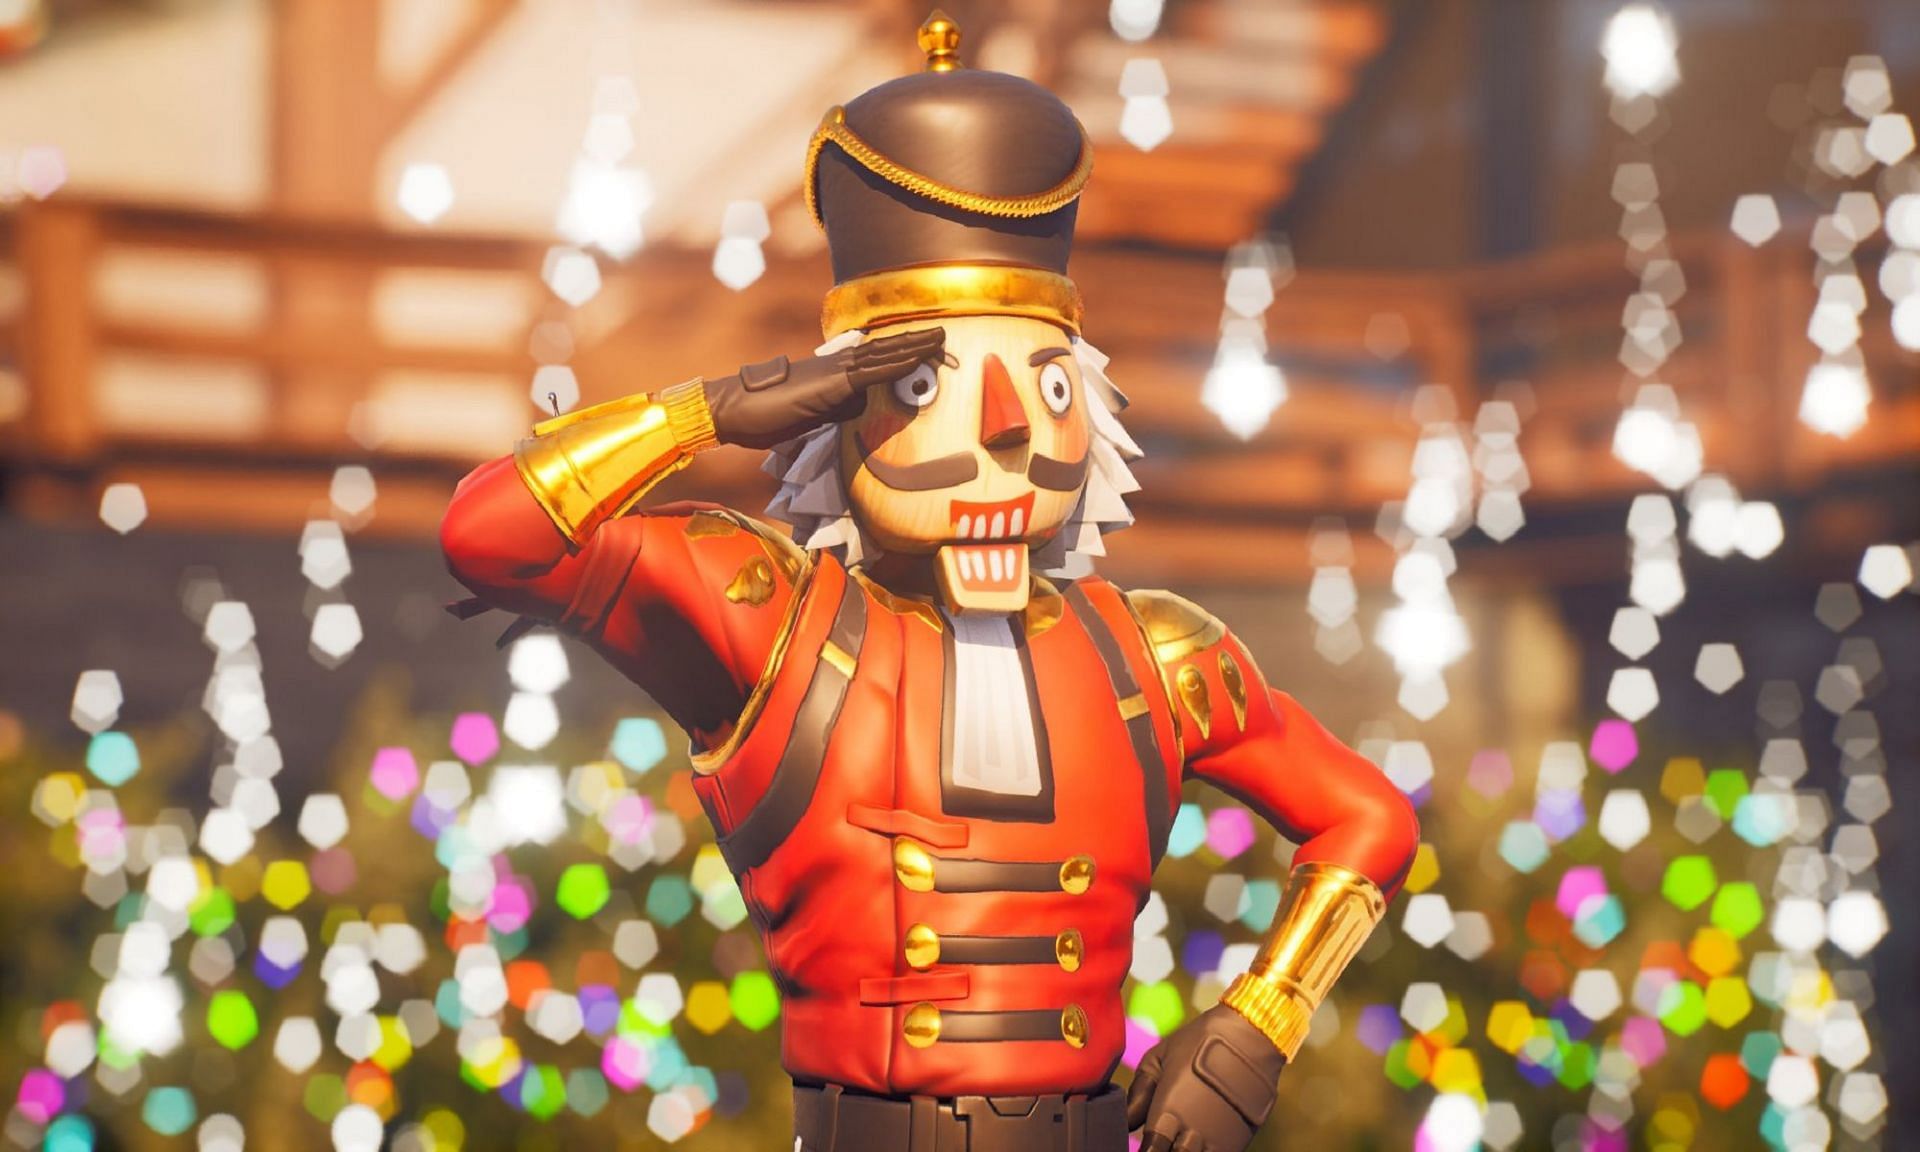 Don&#039;t forget to open the chests under the Christmas trees! (Image via Twitter/BrumWisseme)